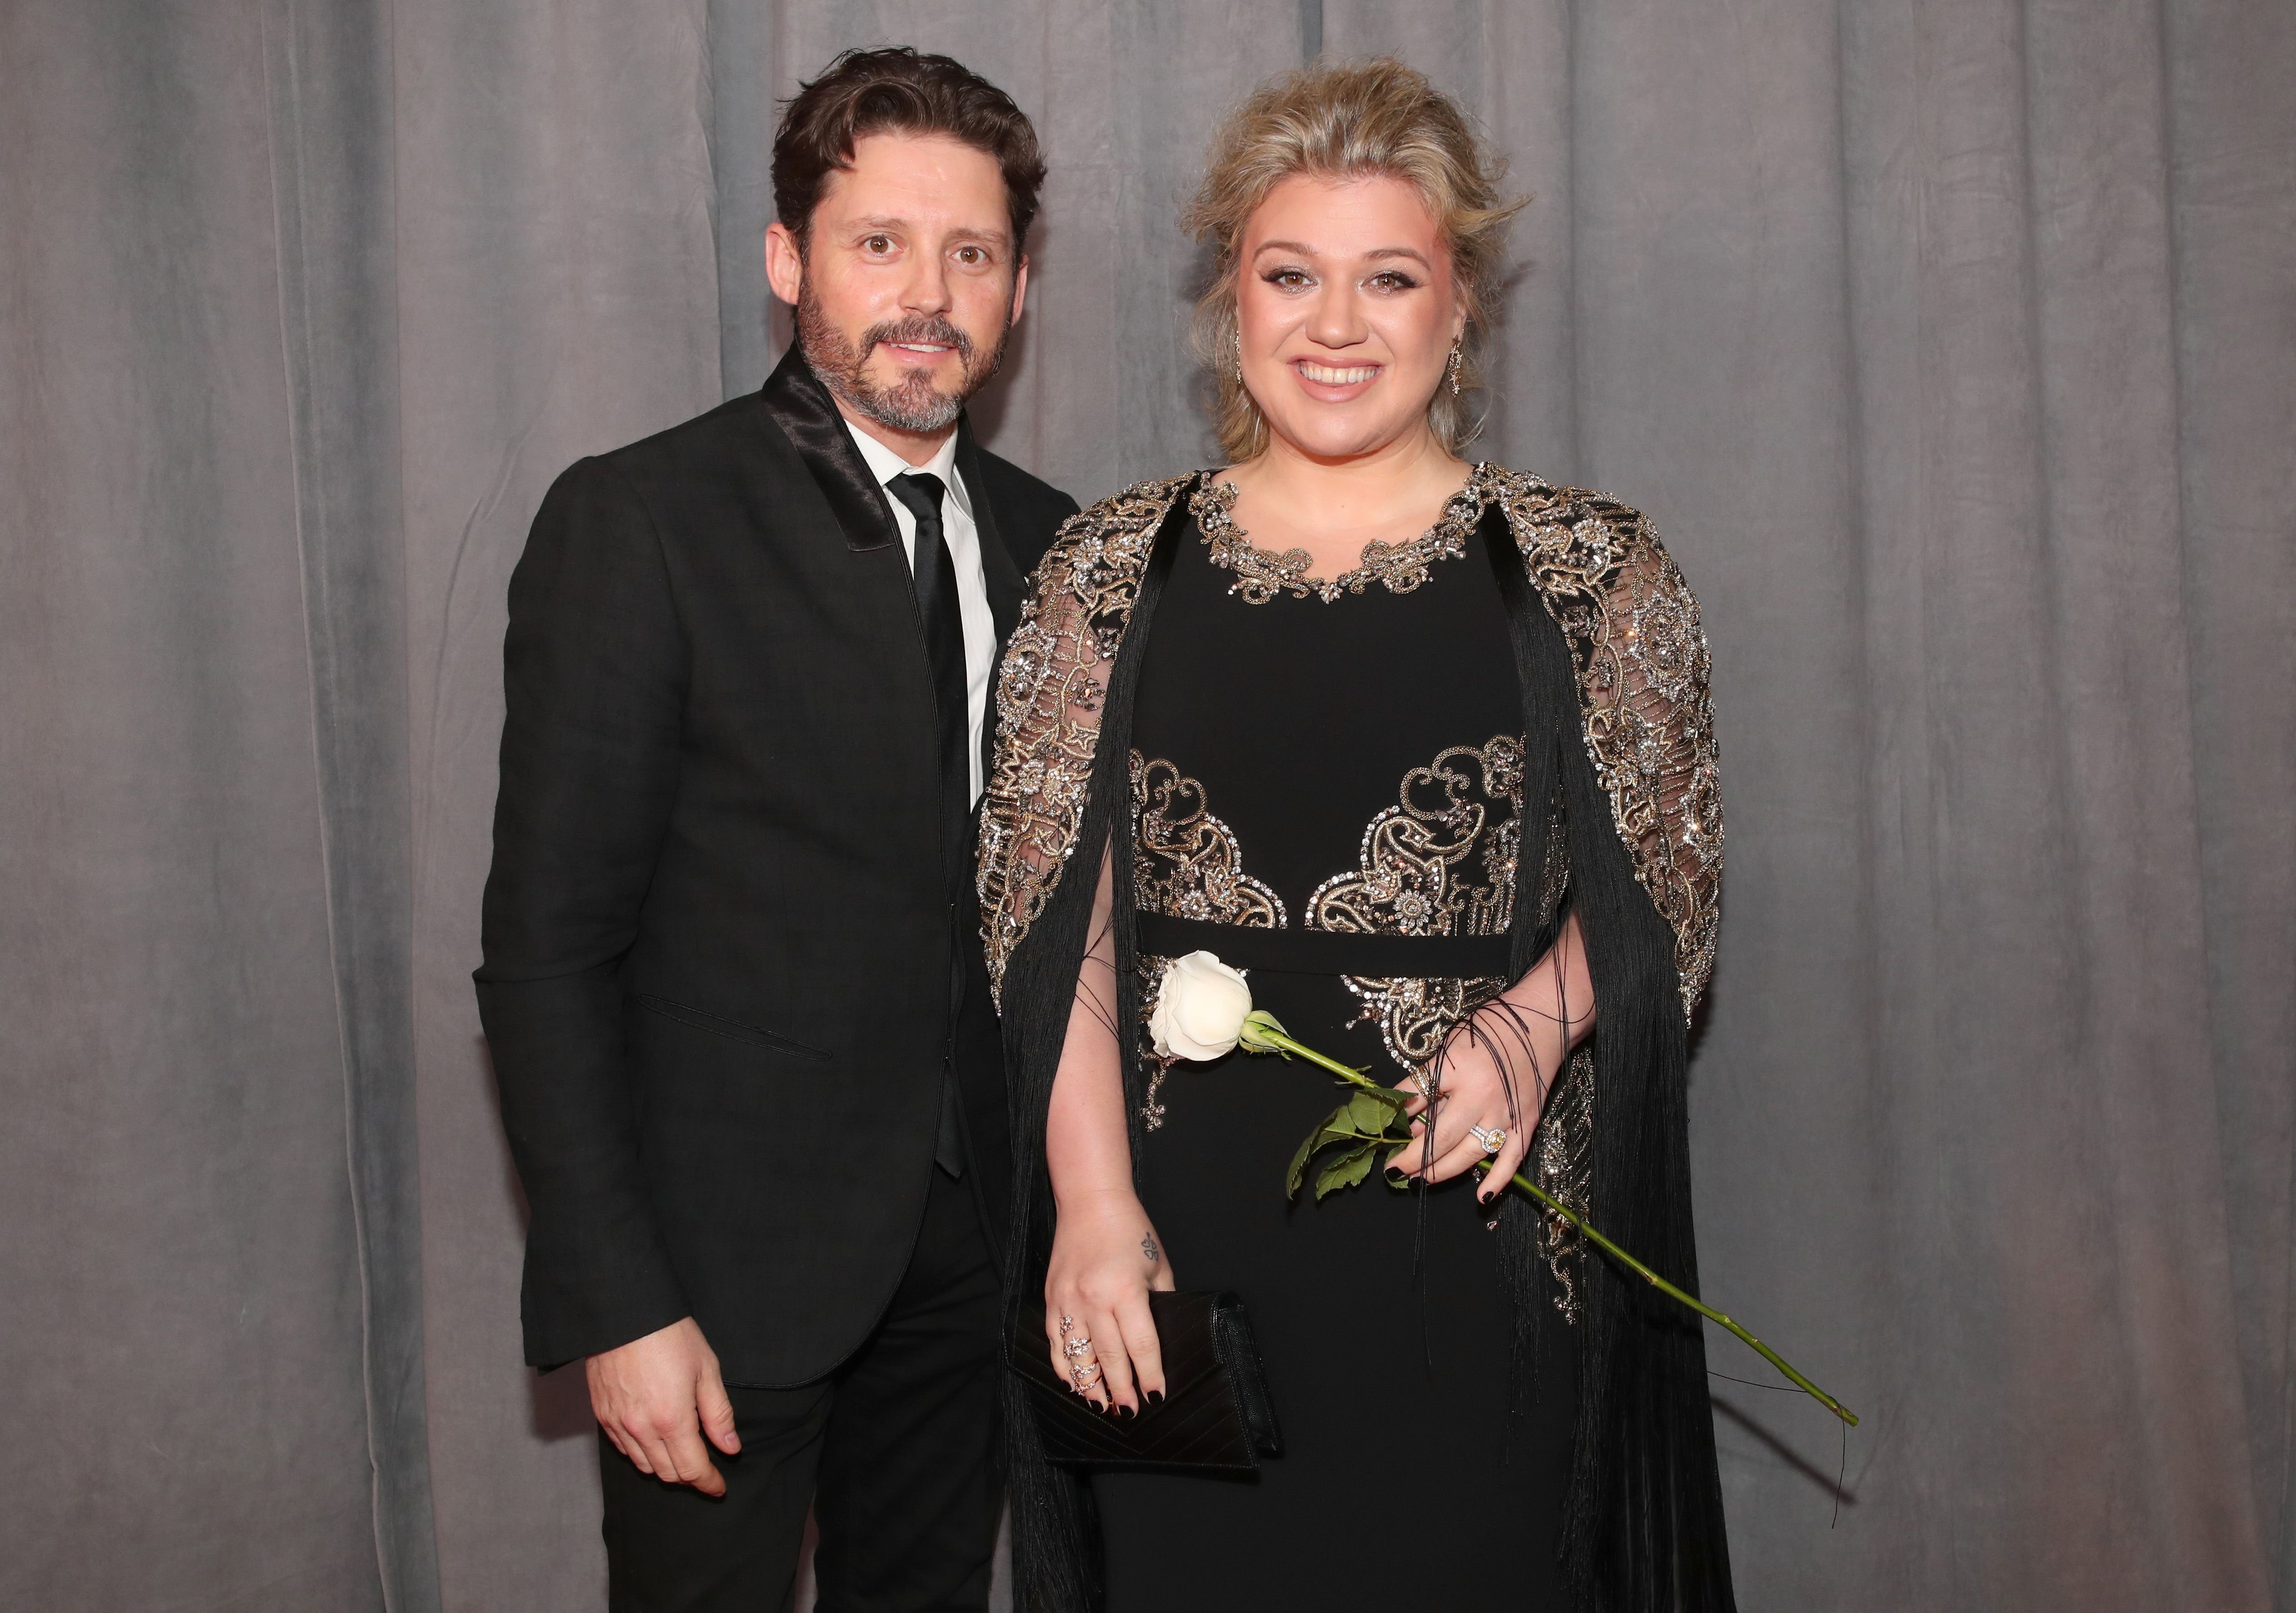 Brandon Blackstock and Kelly Clarkson at the 60th Annual GRAMMY Awards on January 28, 2018 | Photo: getty Images